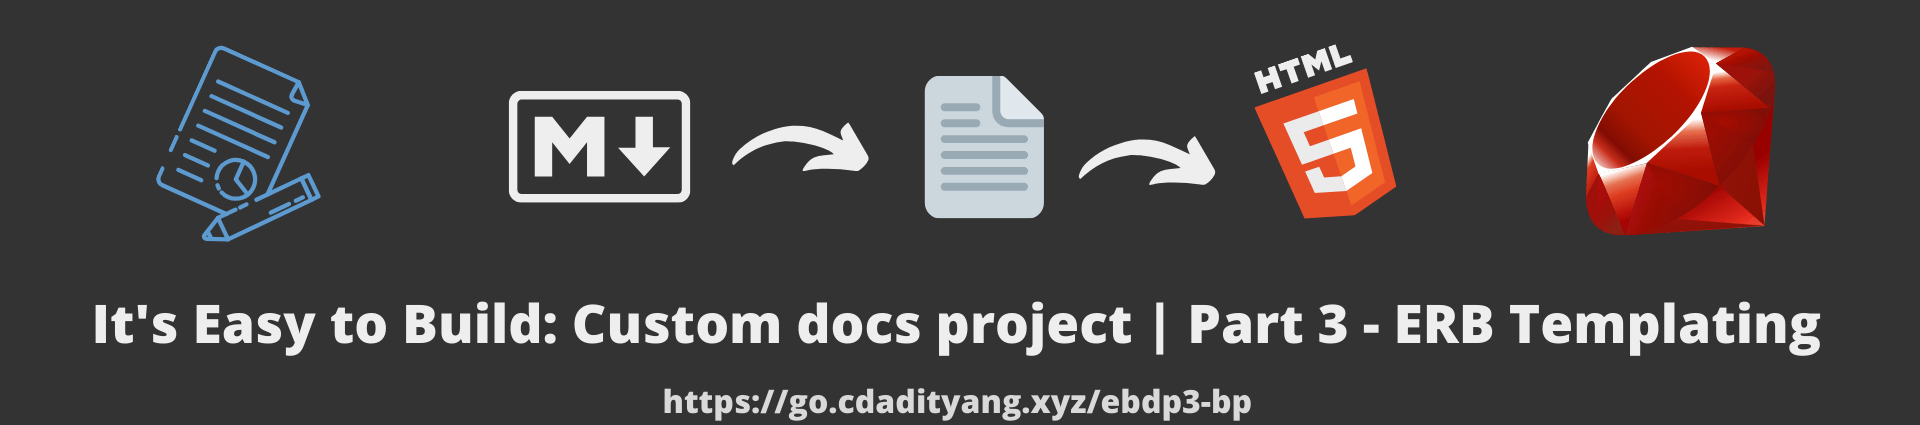 It's Easy to Build: Custom docs project | Part 3 - ERB templating